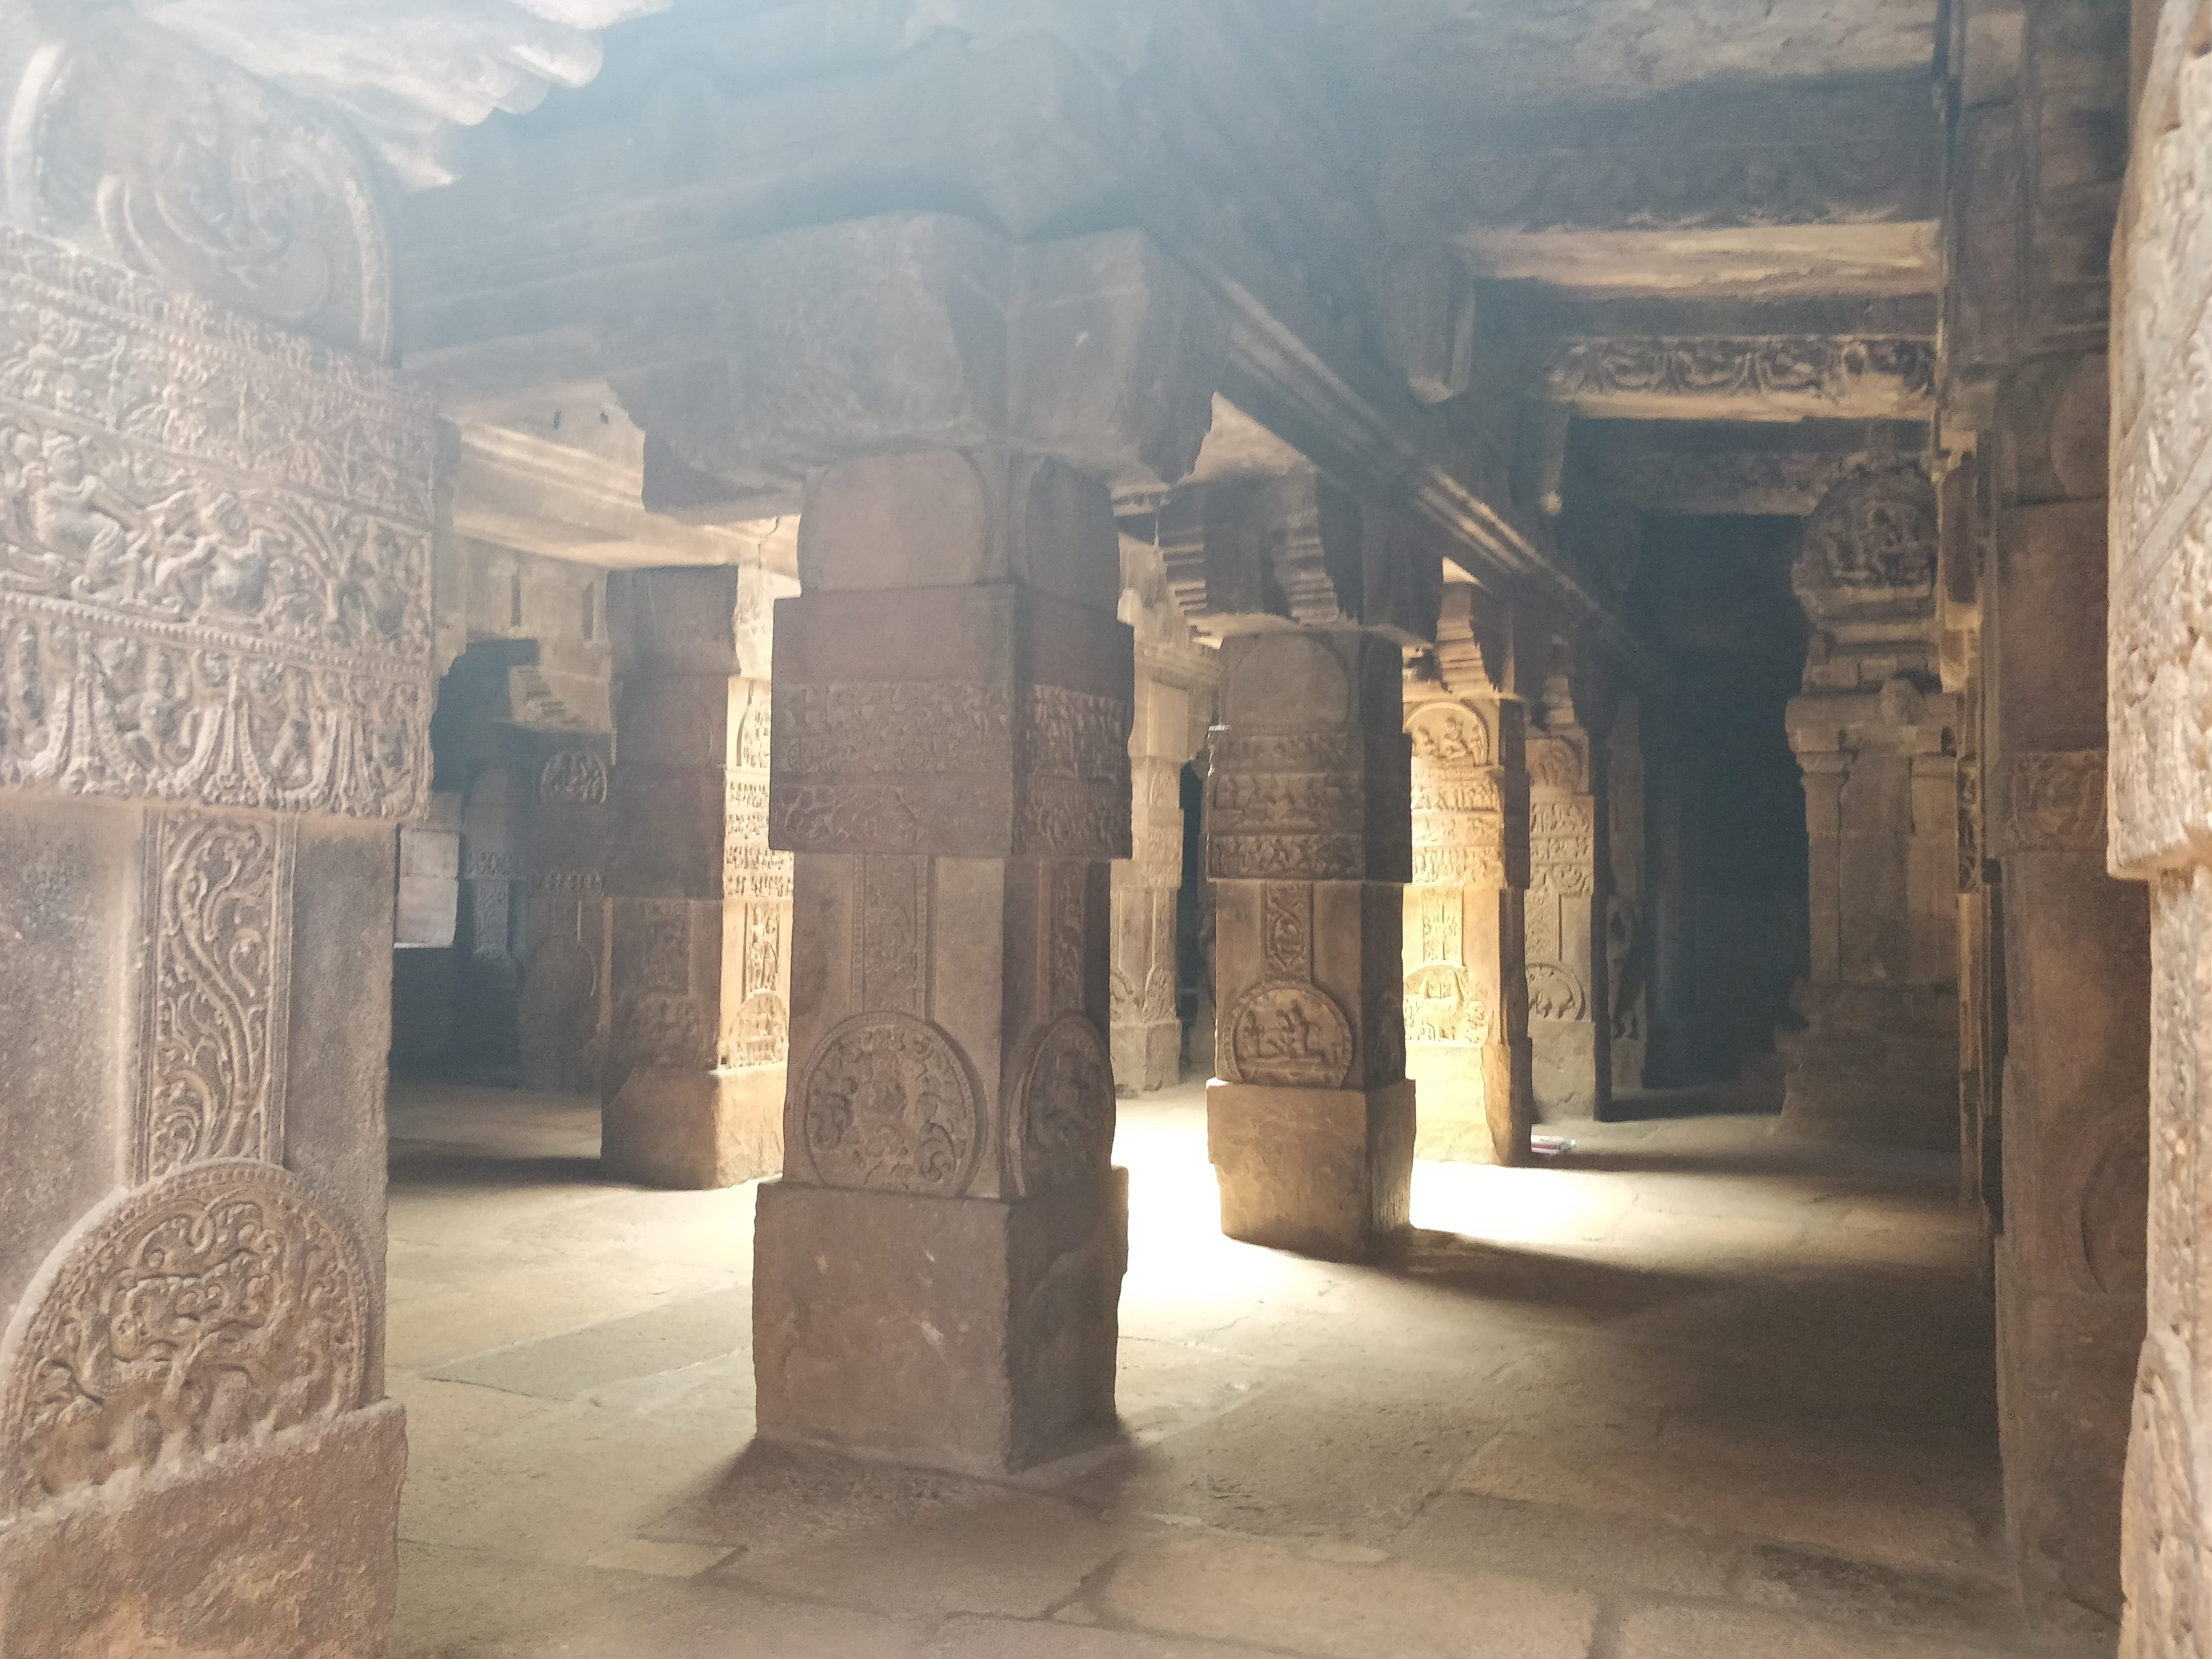 lot of pillars inside the temple